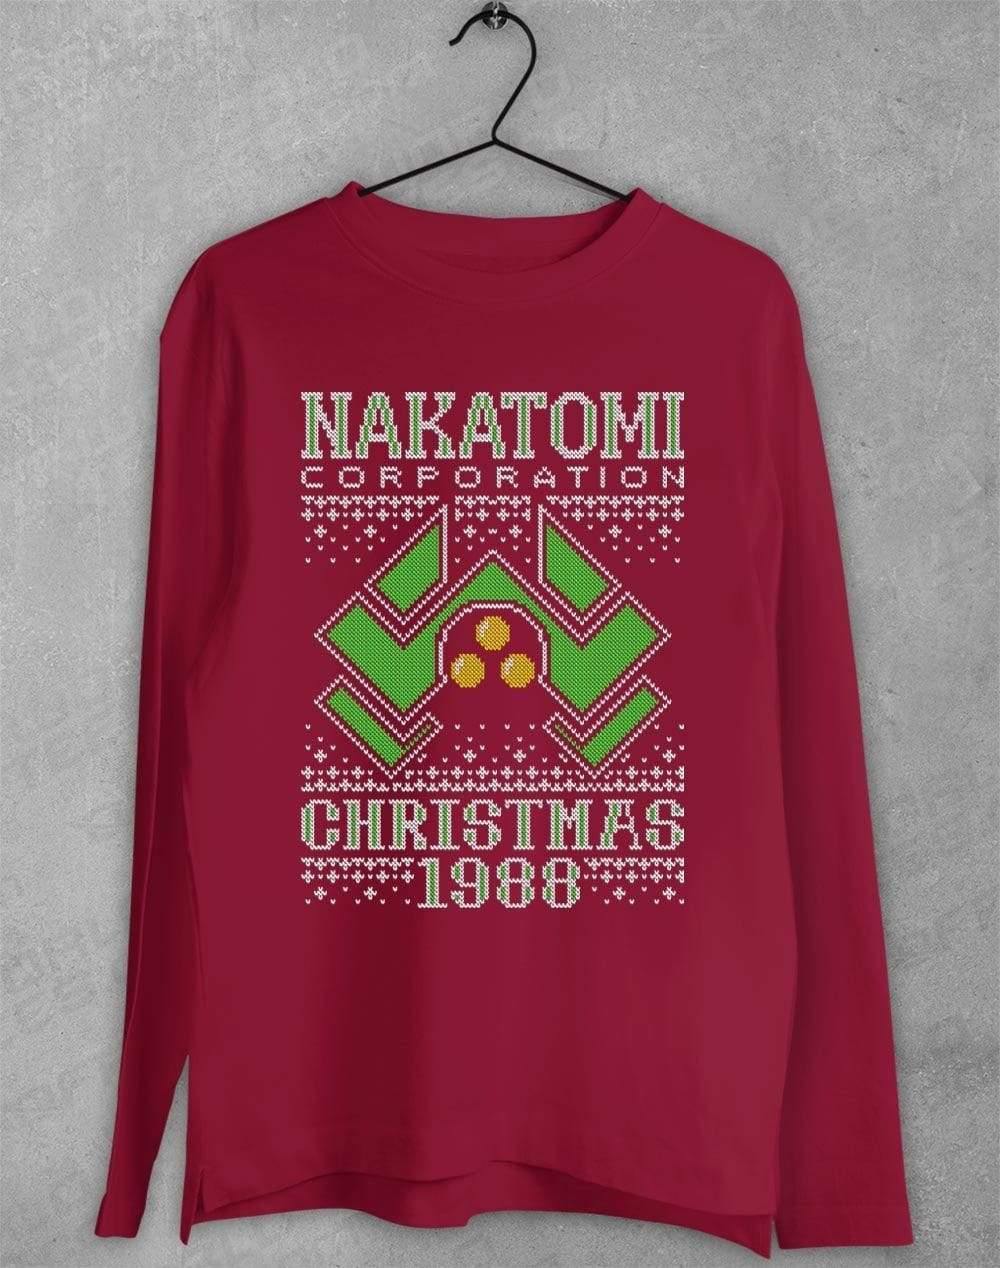 Nakatomi Christmas 1988 Knitted-Look Long Sleeve T-Shirt S / Cardinal Red  - Off World Tees